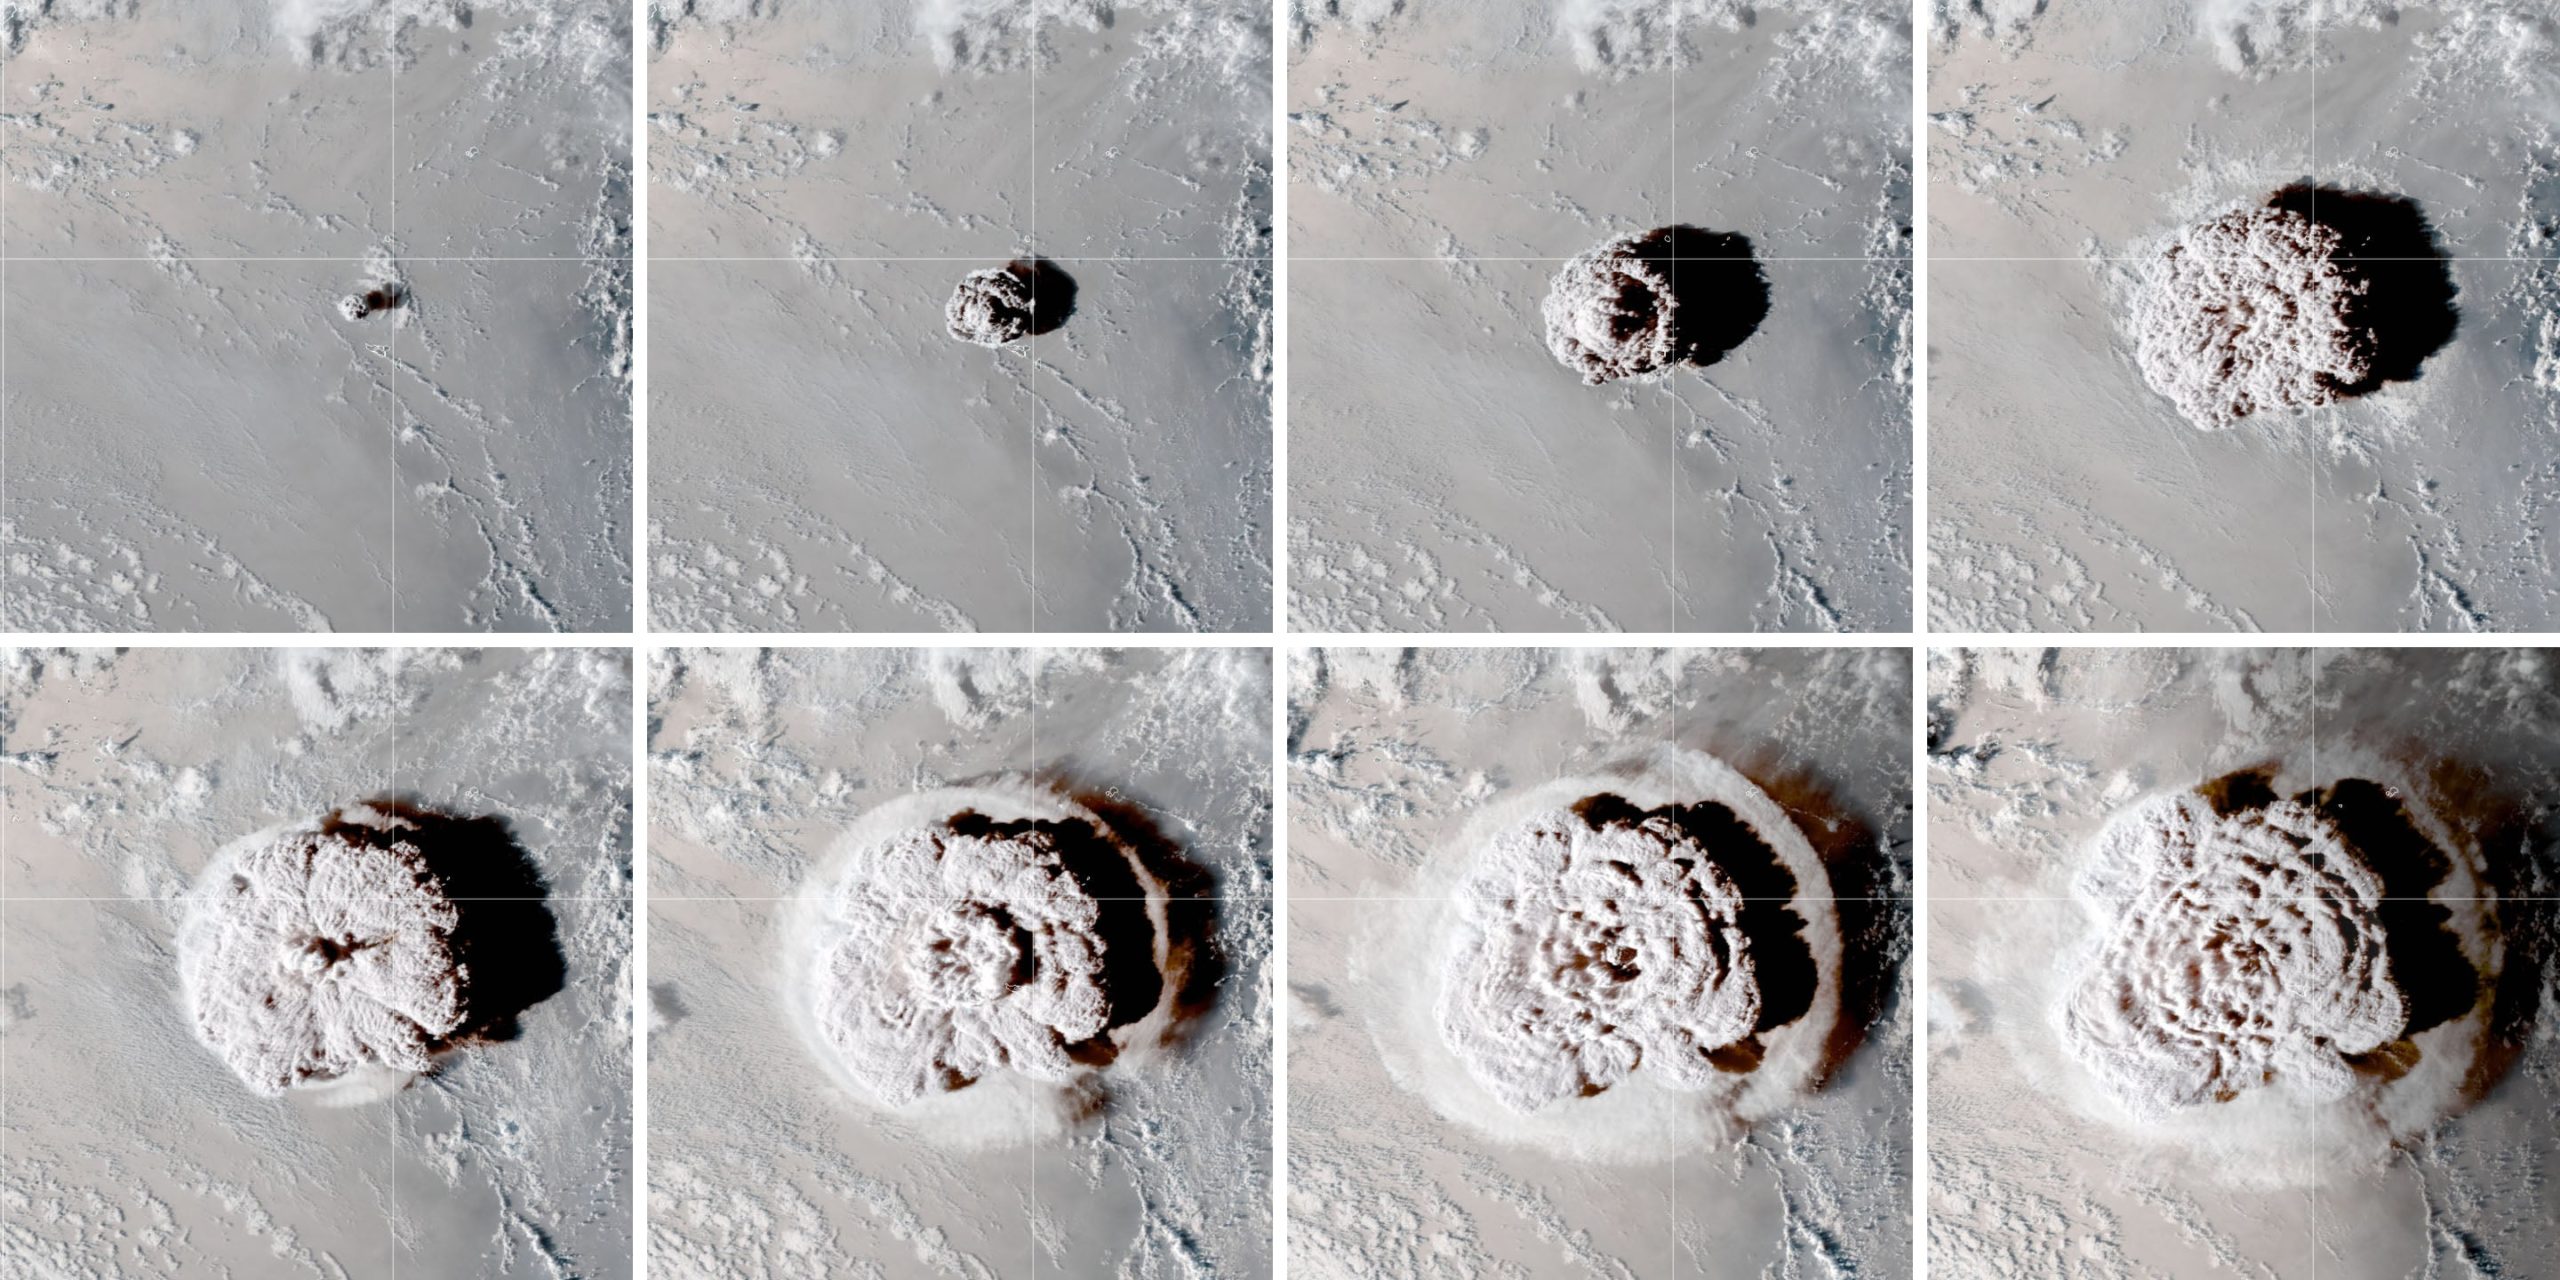 Stereoscopic images showing the rising plume on January 15, 2022. (Image: Kristopher Bedka/Konstantin Khlopenkov/NASA Langley Research Centre/NOAA/NESDIS)